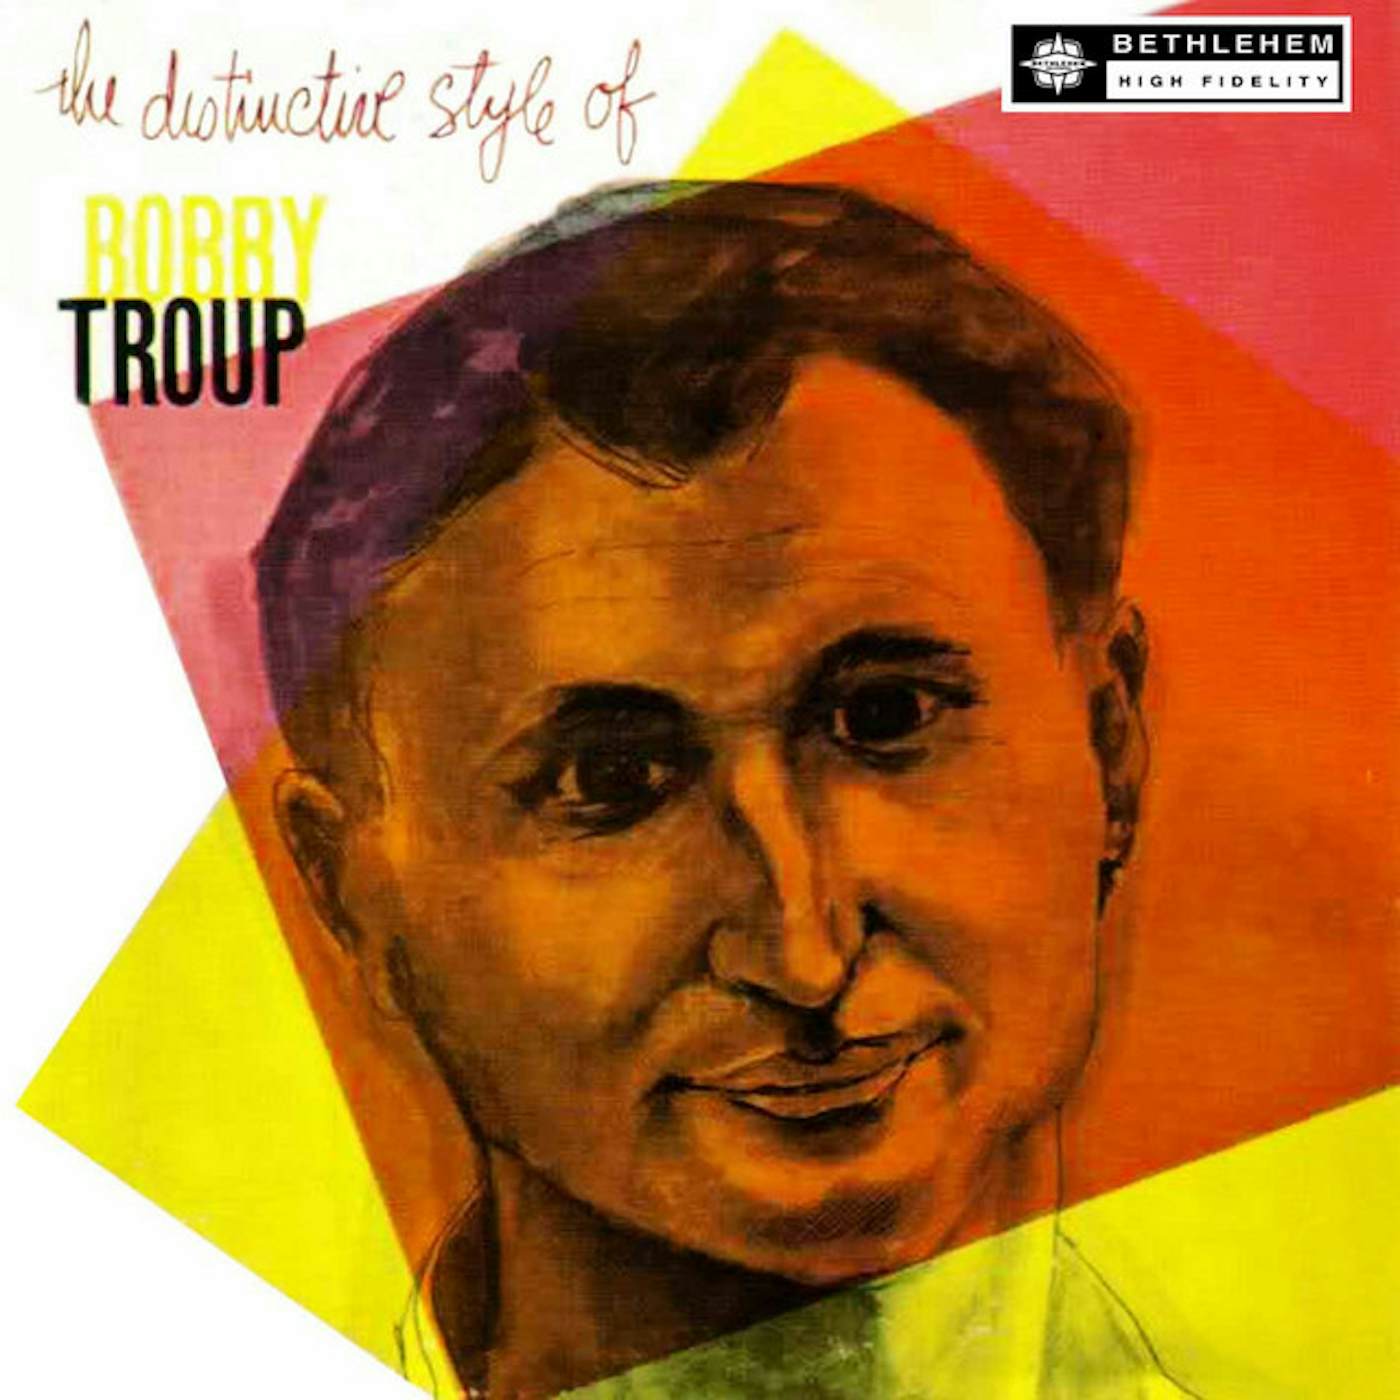 DISTINCTIVE STYLE OF BOBBY TROUP CD